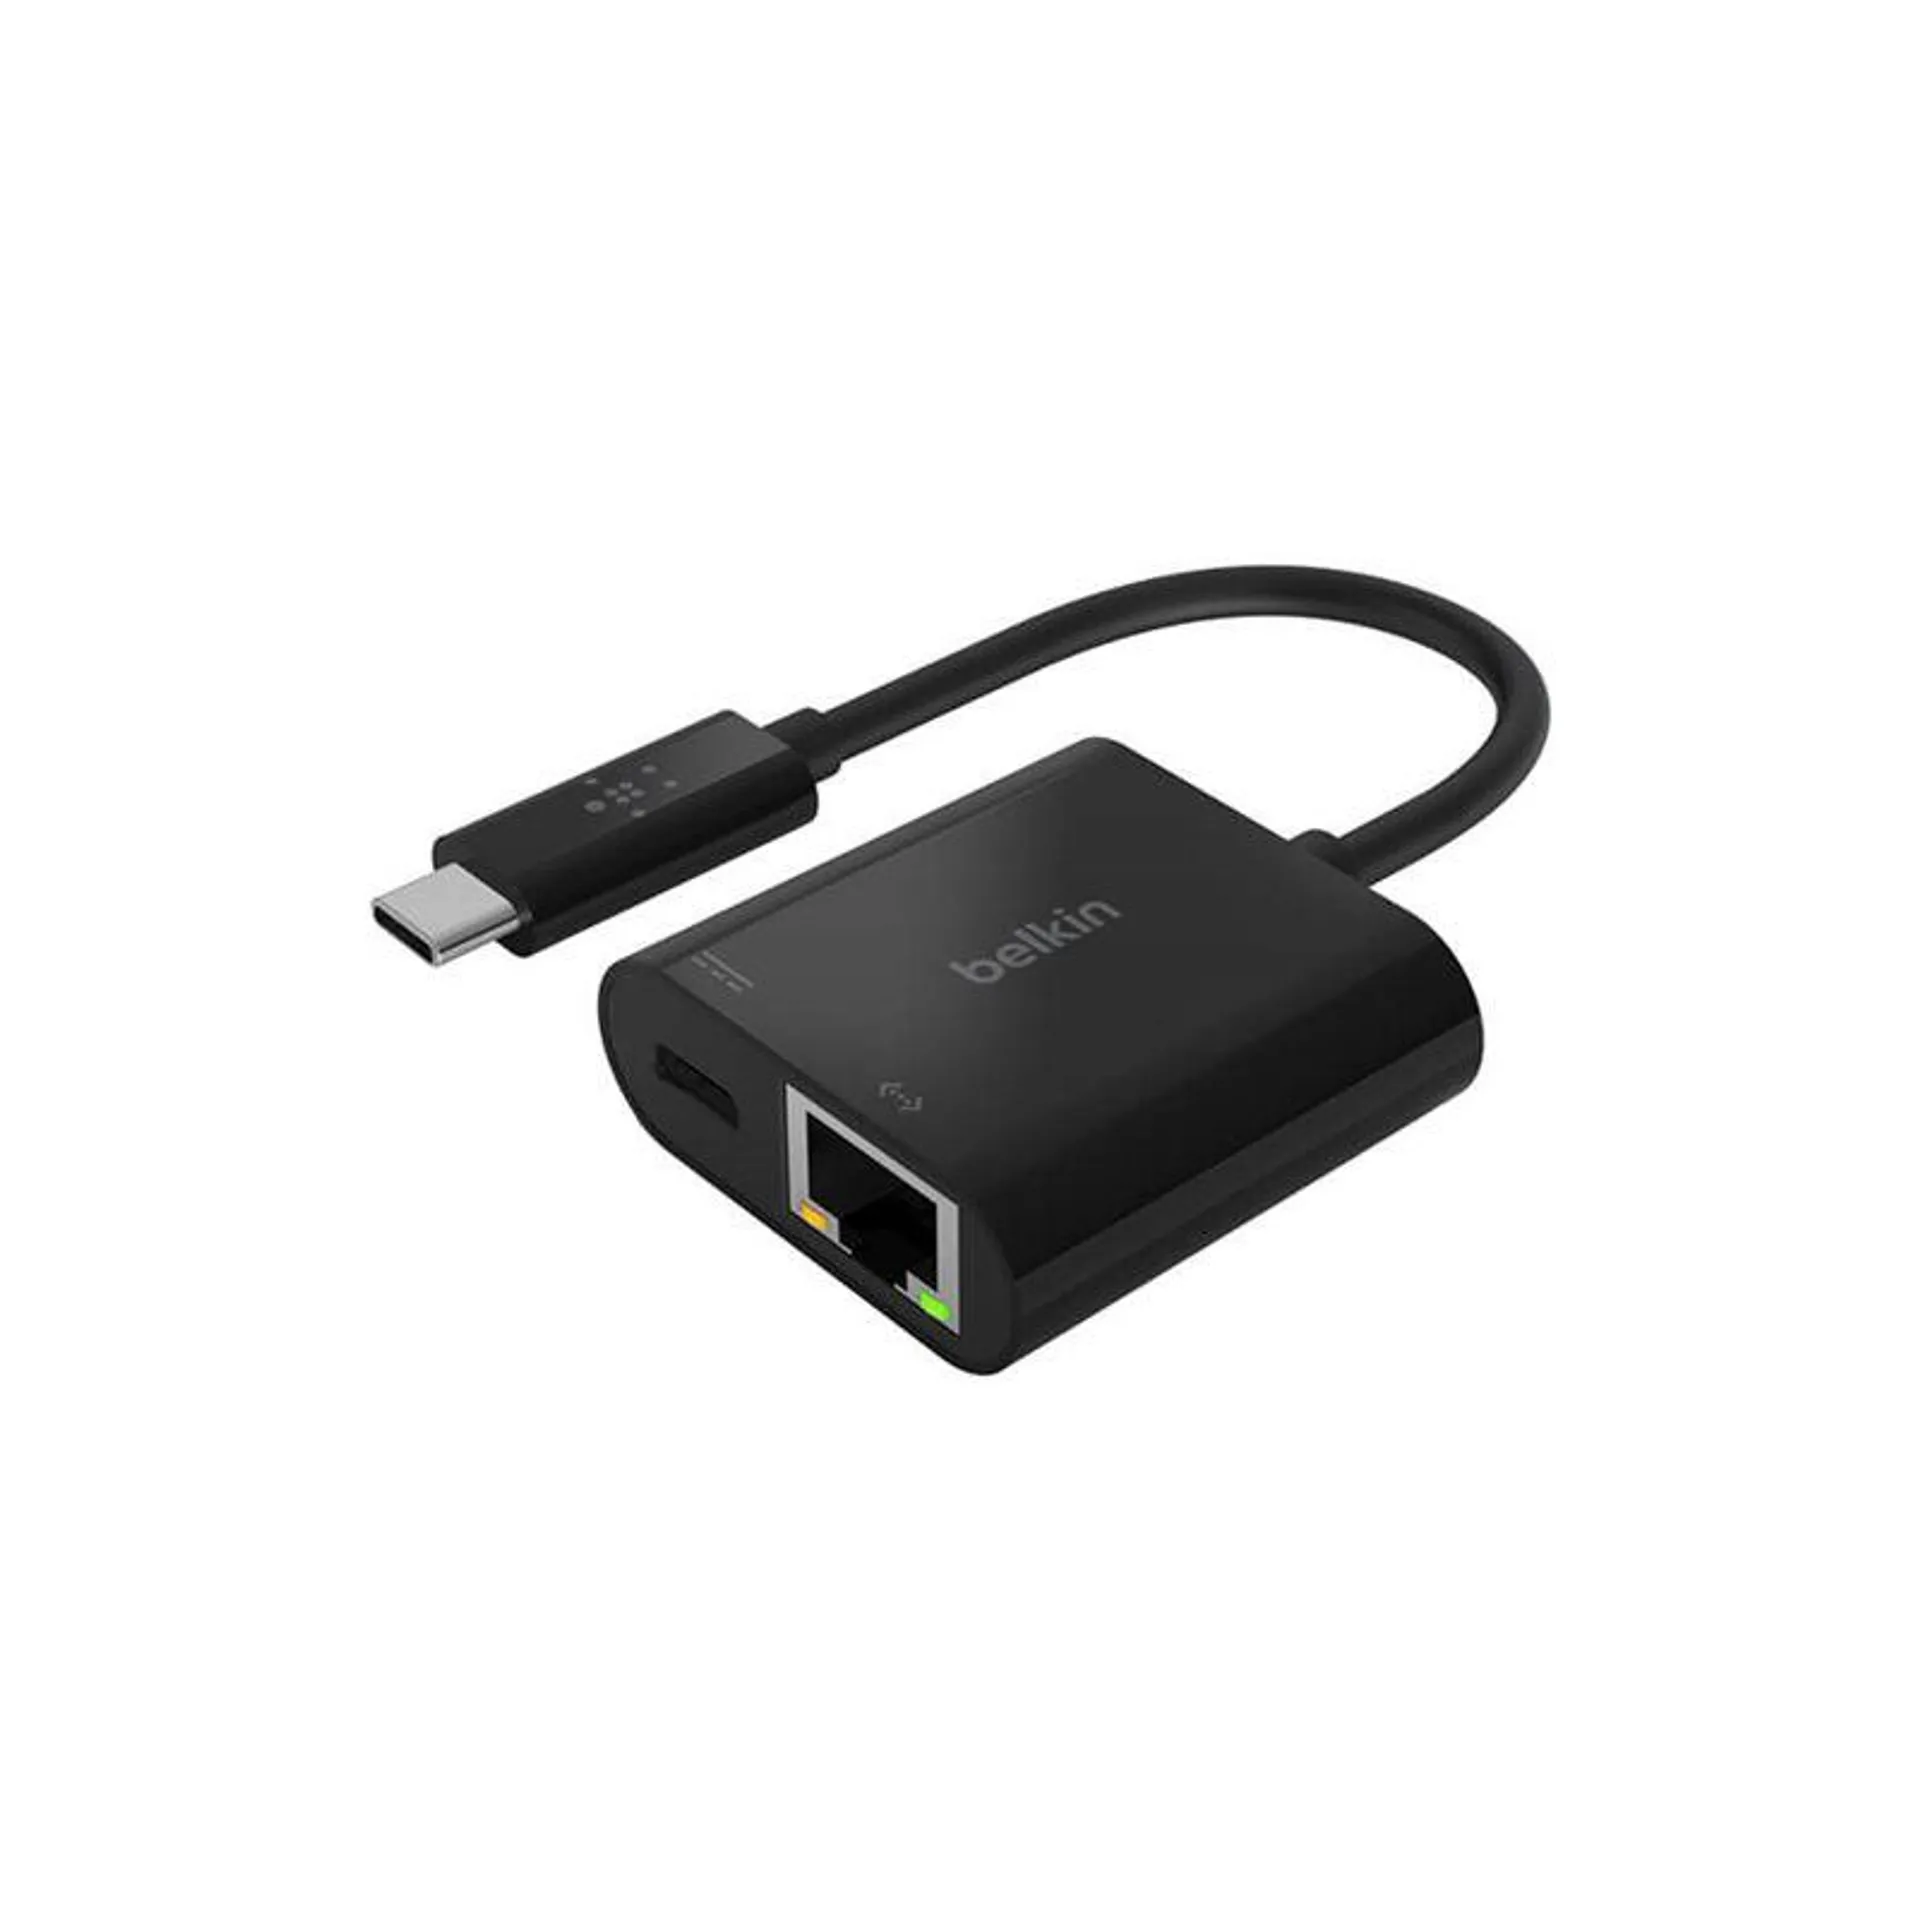 Belkin USB-C to Ethernet Adapter + 60W Charge Adapter